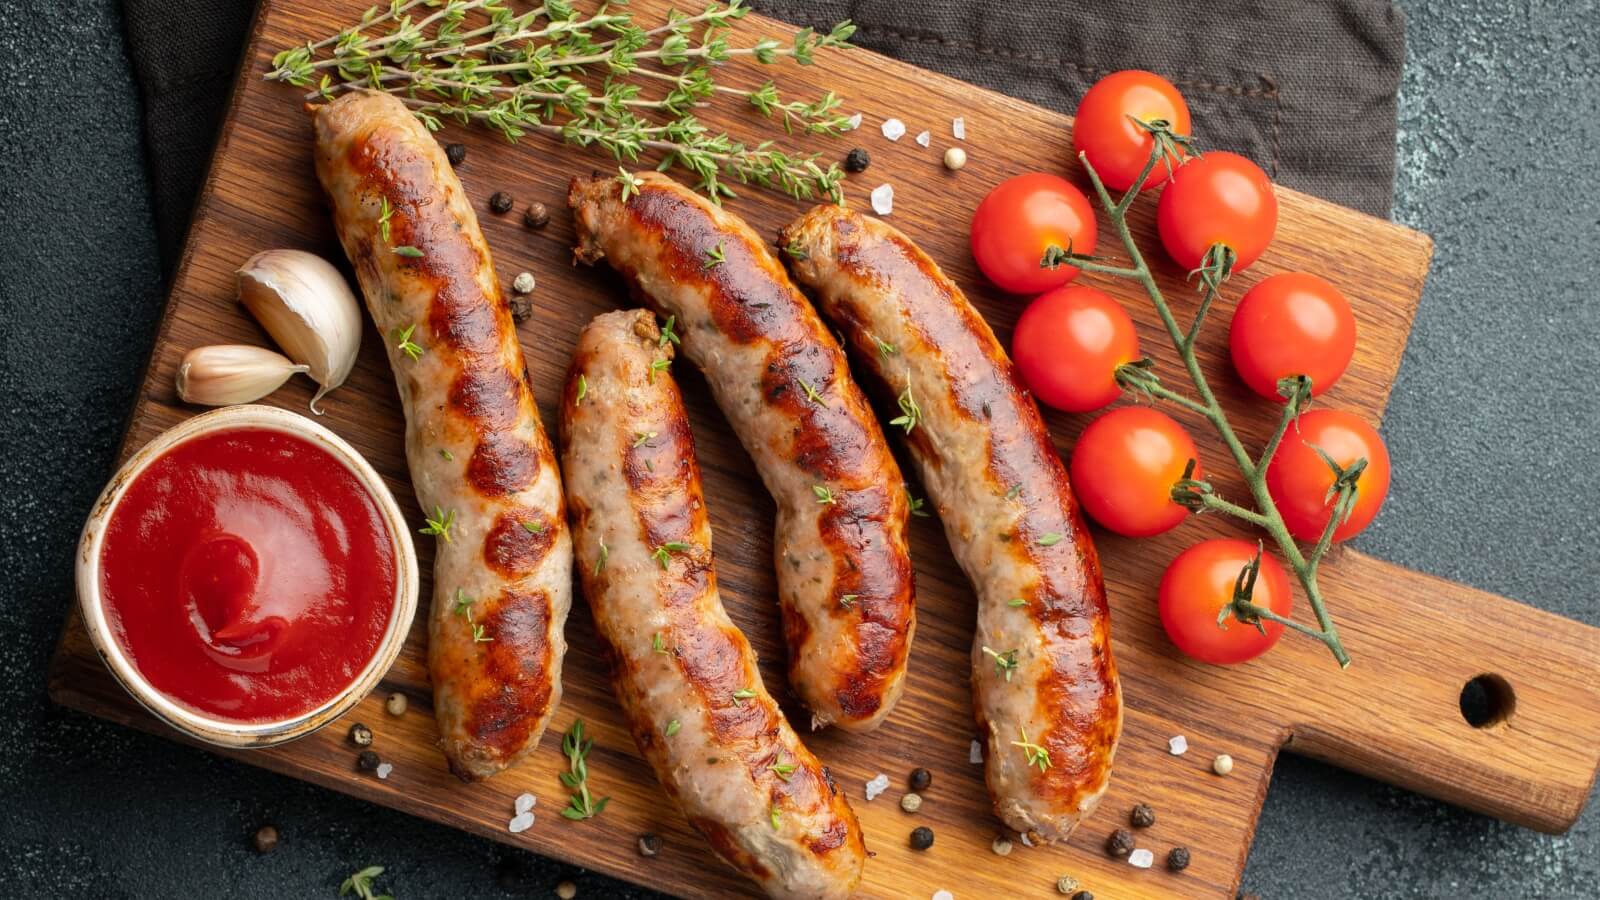 India’s First Vegan Meat Company Launches Chicken And Pork Sausages To Help The Planet